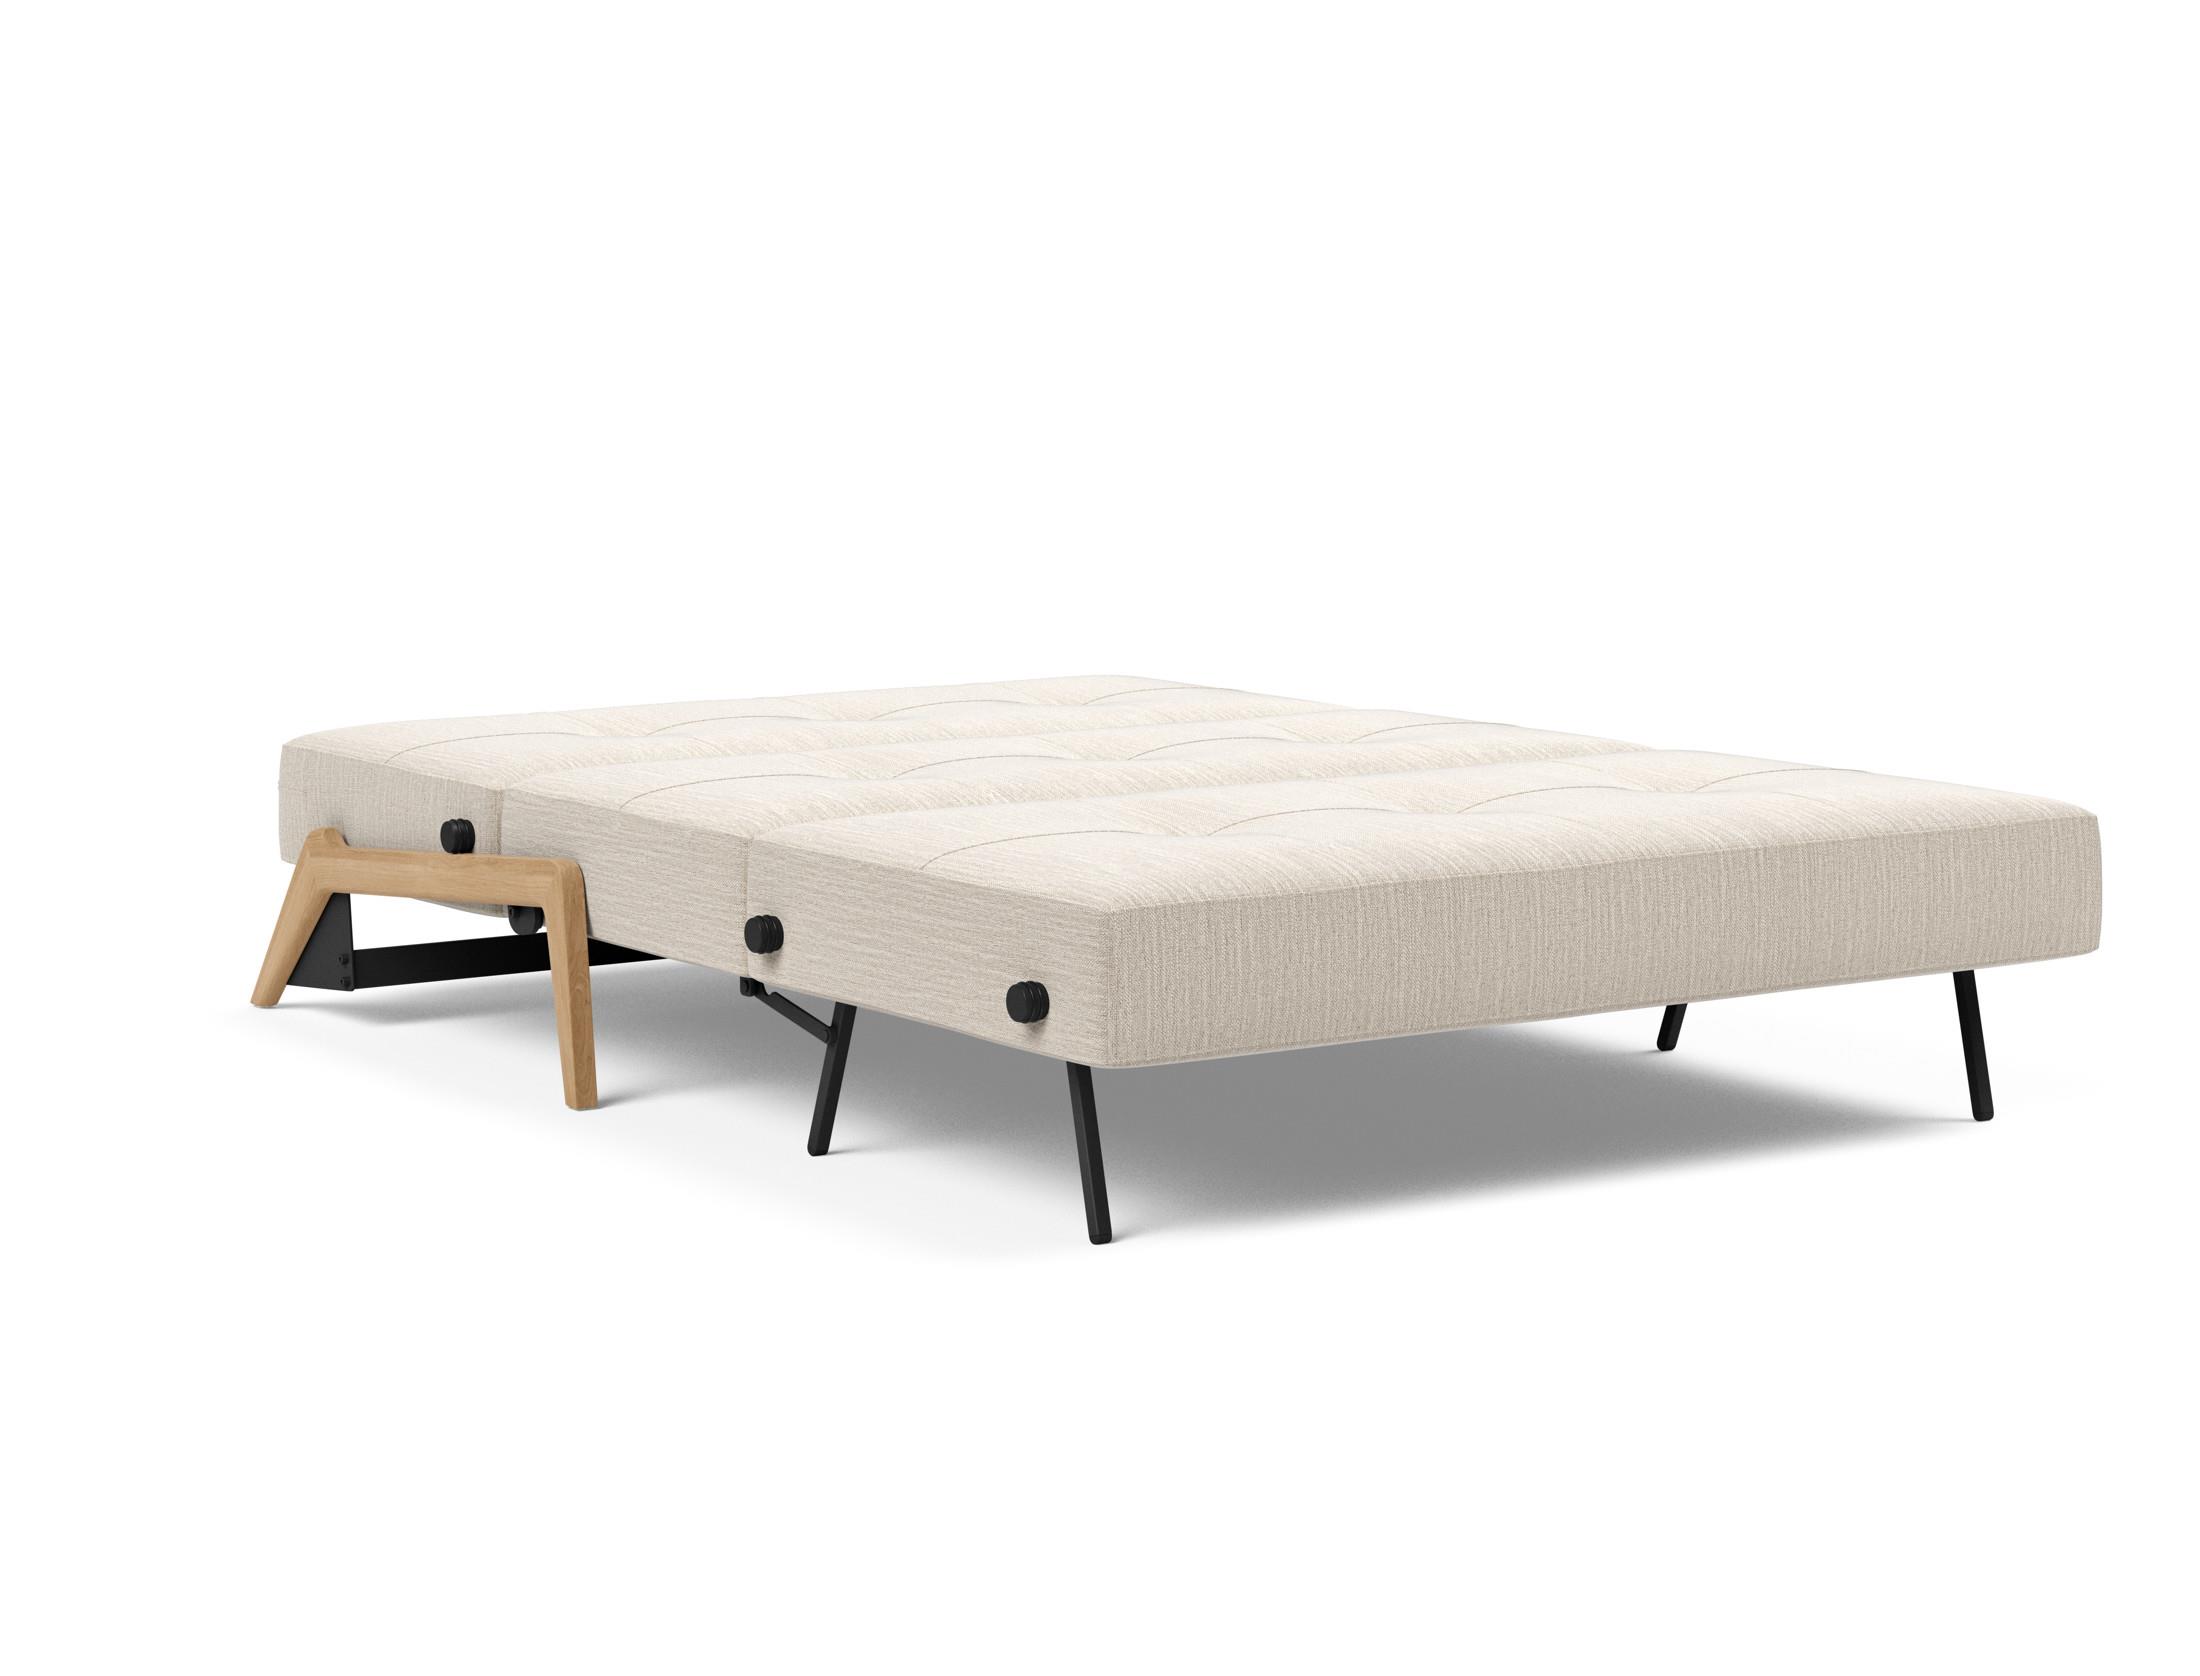 Диван Cubed 140 Innovation. Innovation Cubed 140 Wood. Диван - Cubed 160 Wood Sofa Bed. Innovation Cubed 140 528 Wood. Cubed 140